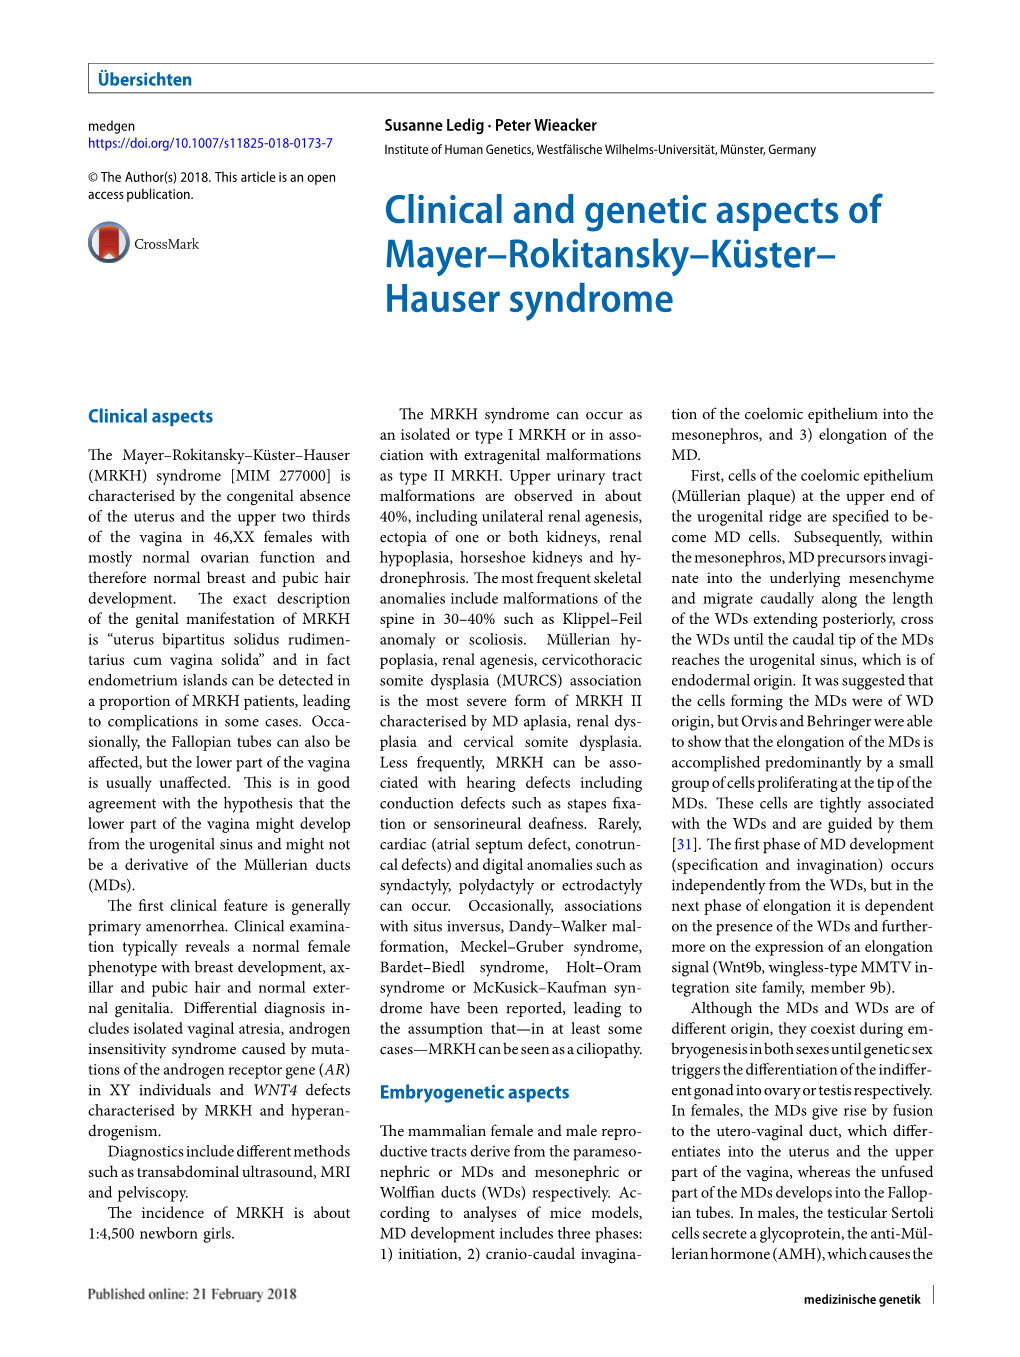 Clinical and Genetic Aspects of Mayer–Rokitansky–Küster– Hauser Syndrome